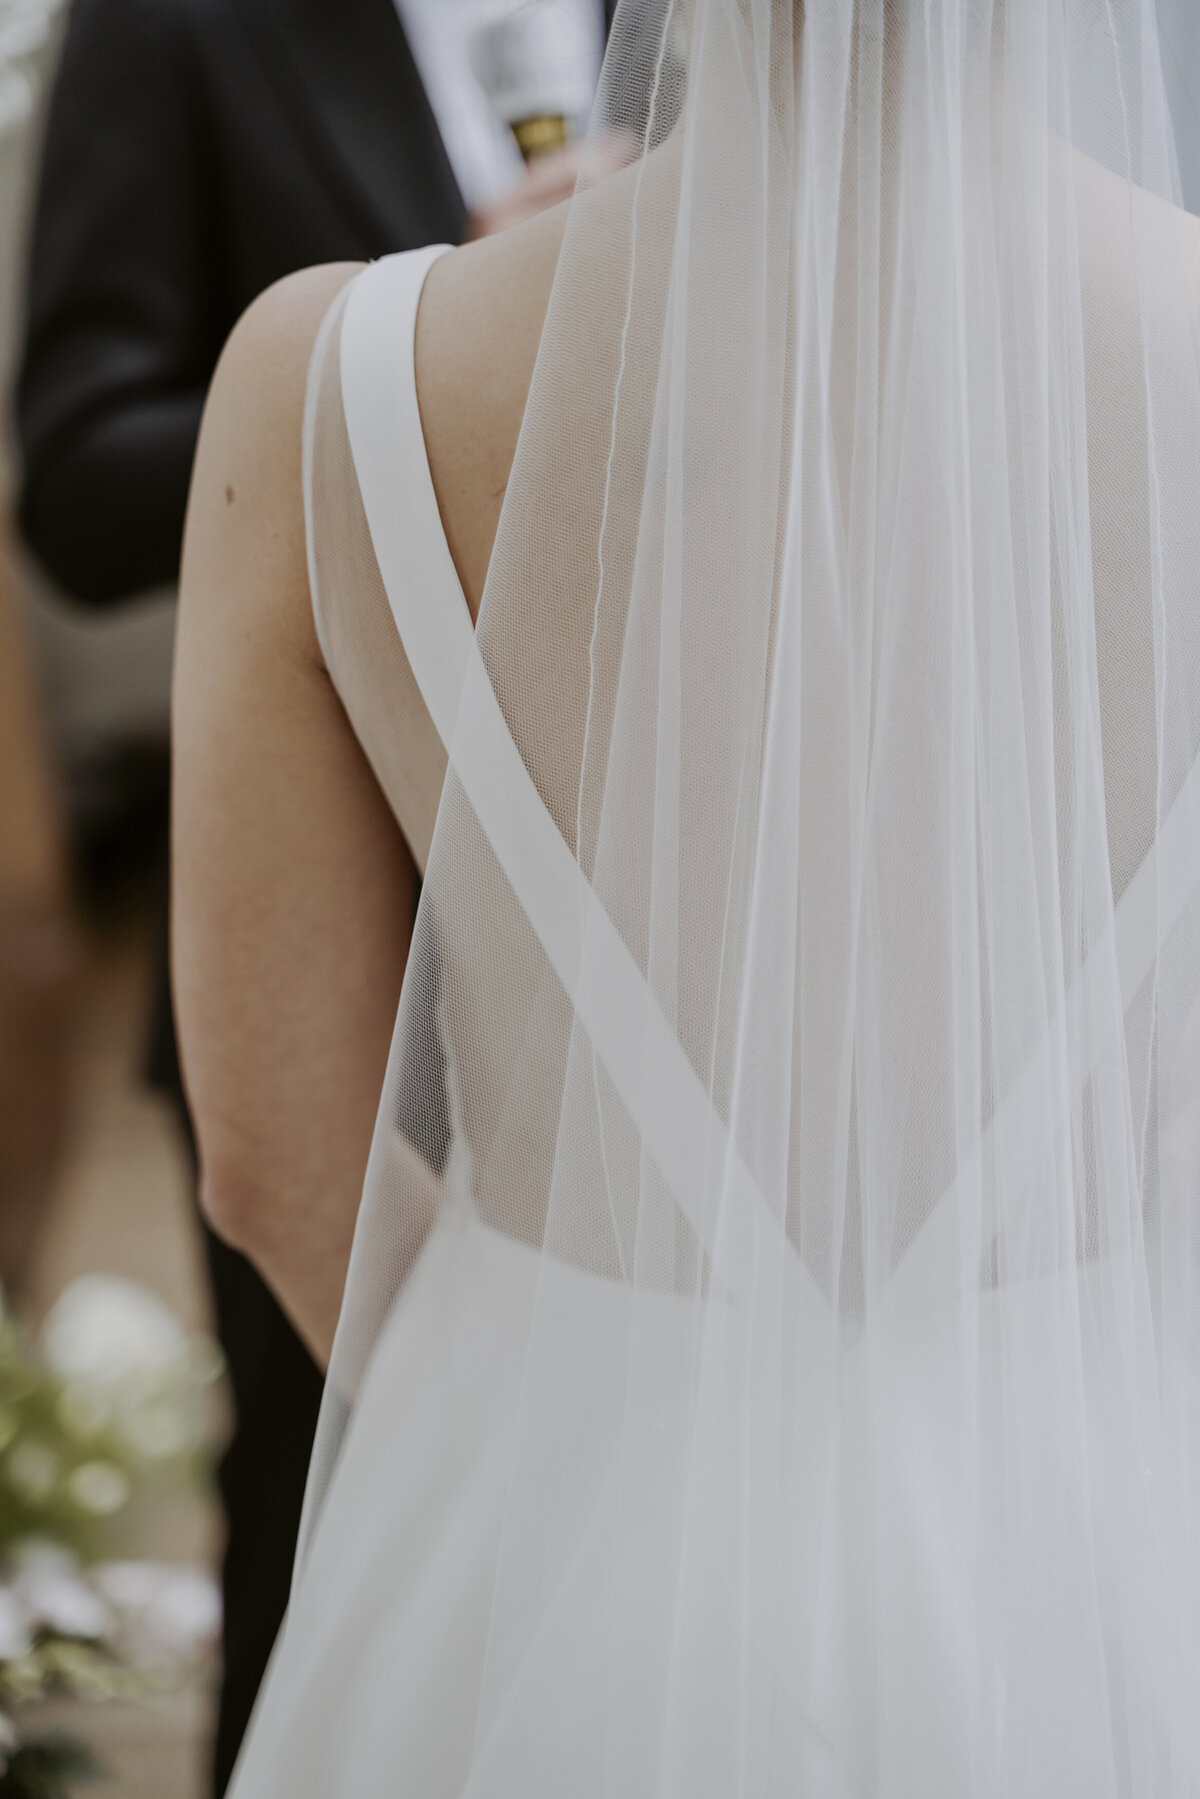 back less wedding dress and the veil of the bride